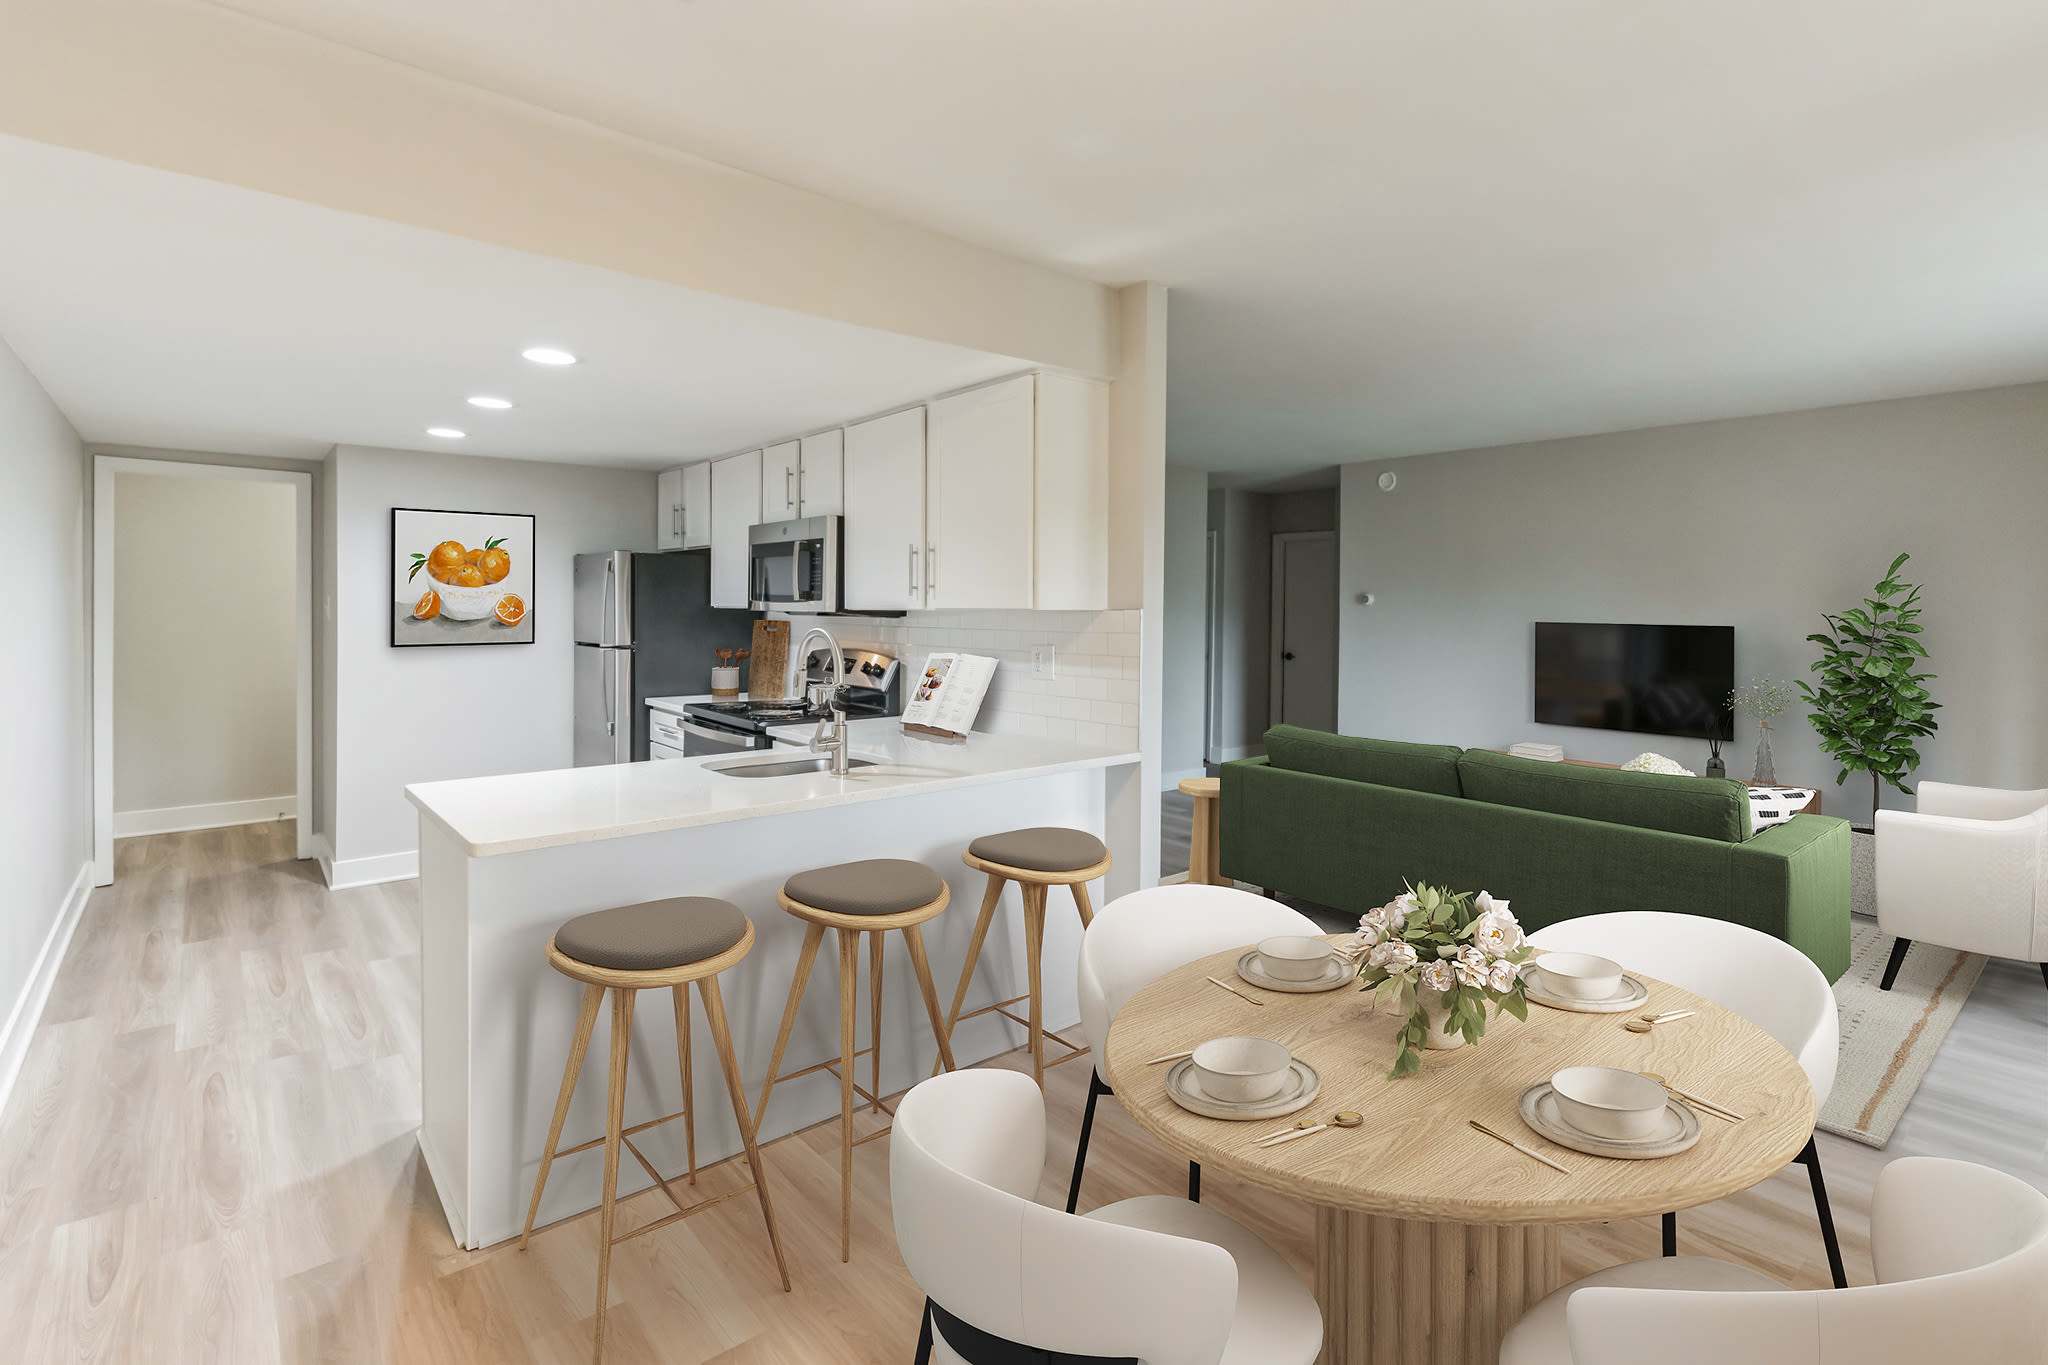 Enjoy Apartments with a Living Room showcasing the Kitchen Area at Eagle Rock Apartments at Malvern in Malvern, Pennsylvania